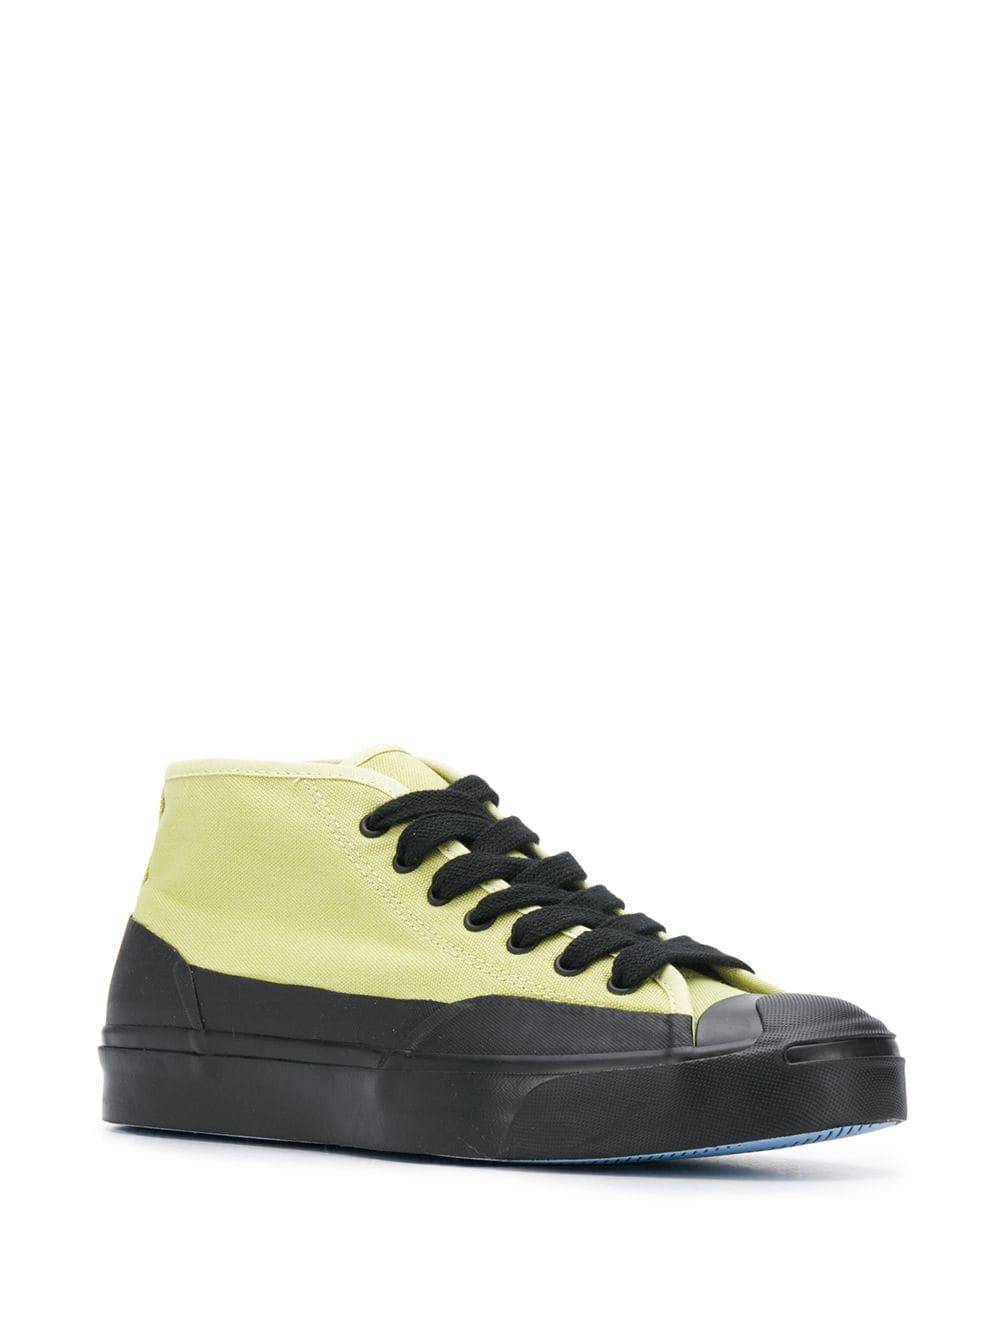 Converse Rubber X A$ap Nast Jack Purcell in Green for Men - Lyst